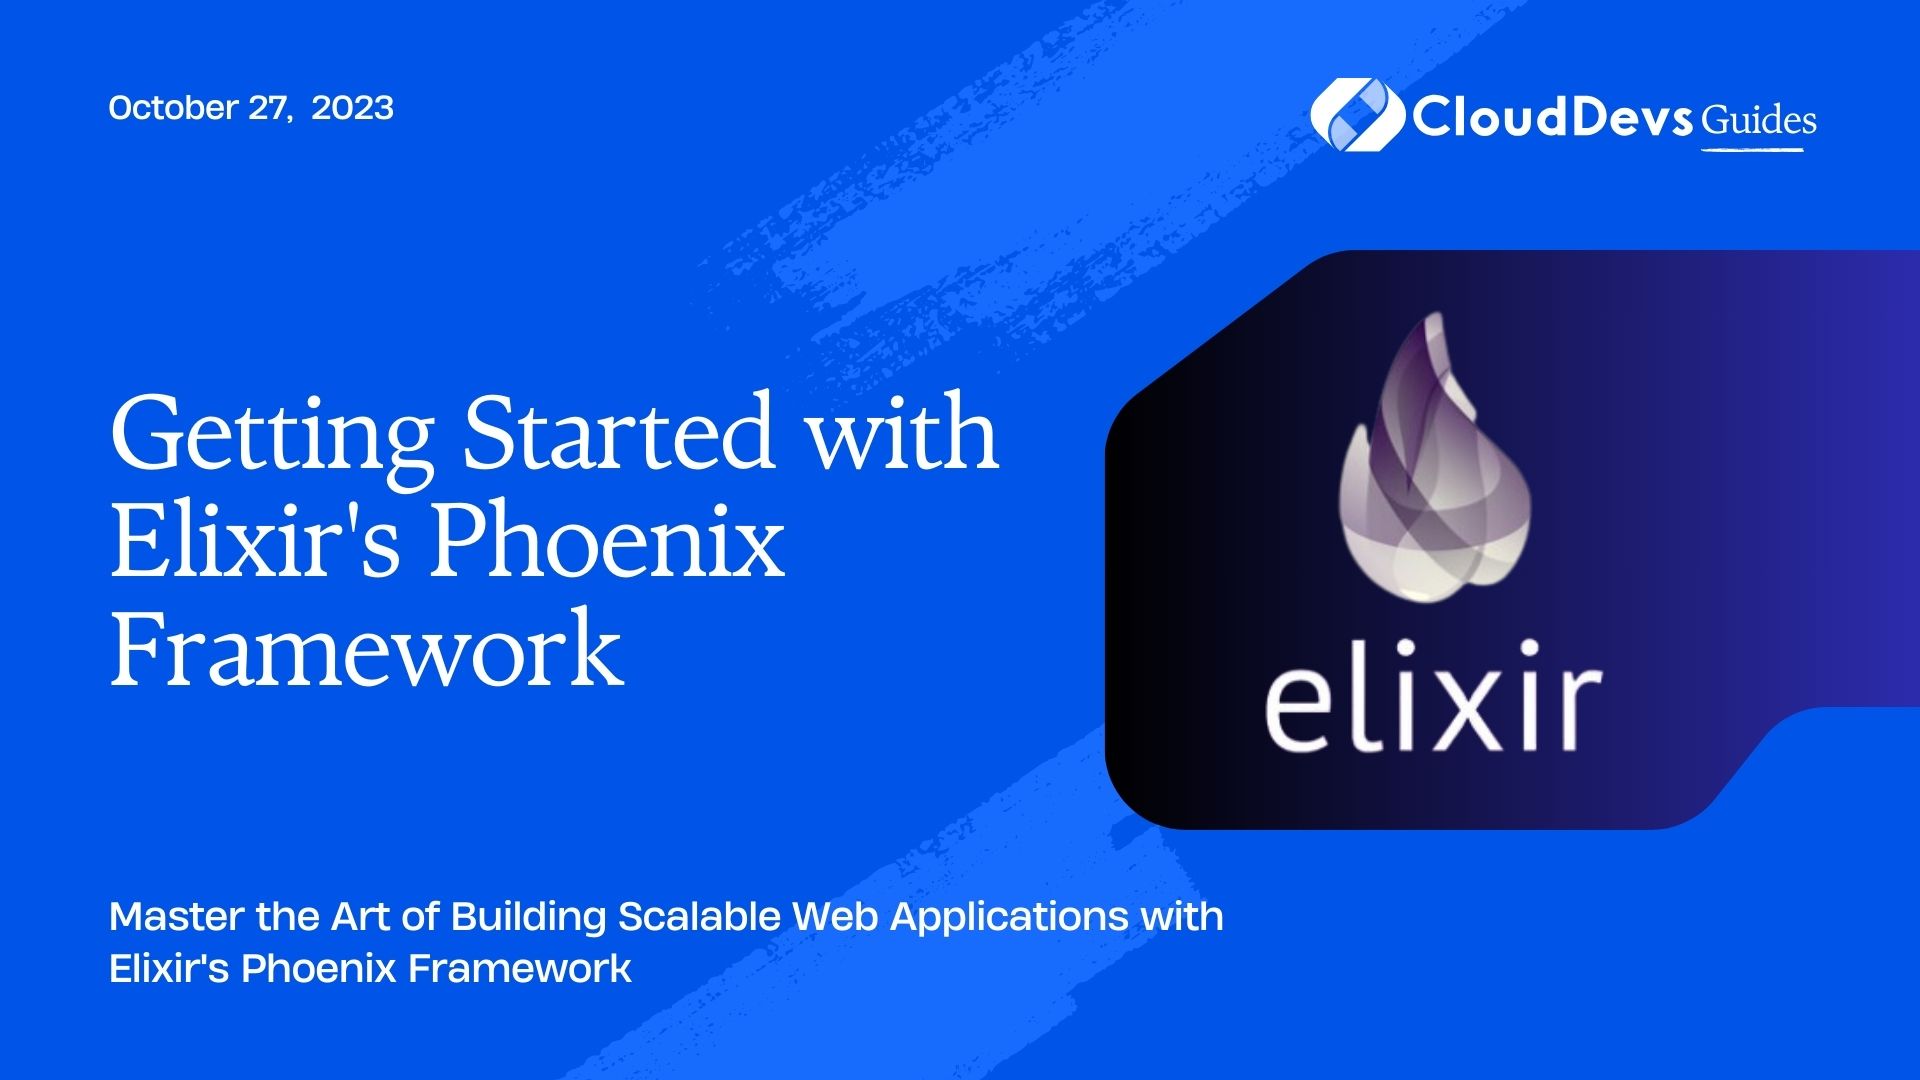 Getting Started with Elixir's Phoenix Framework